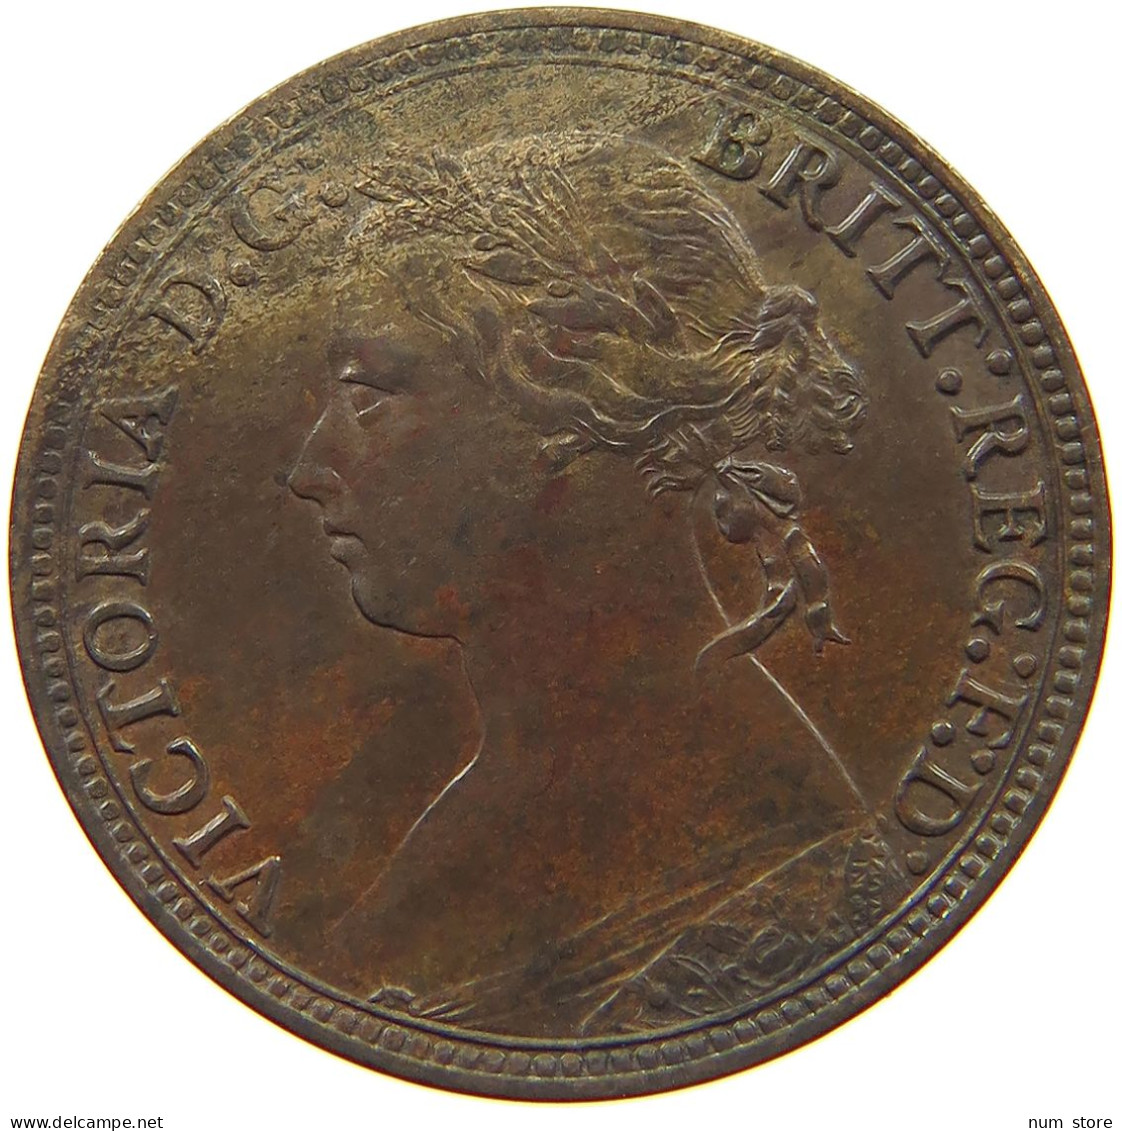 GREAT BRITAIN FARTHING 1879 Victoria 1837-1901 #a002 0537 - B. 1 Farthing